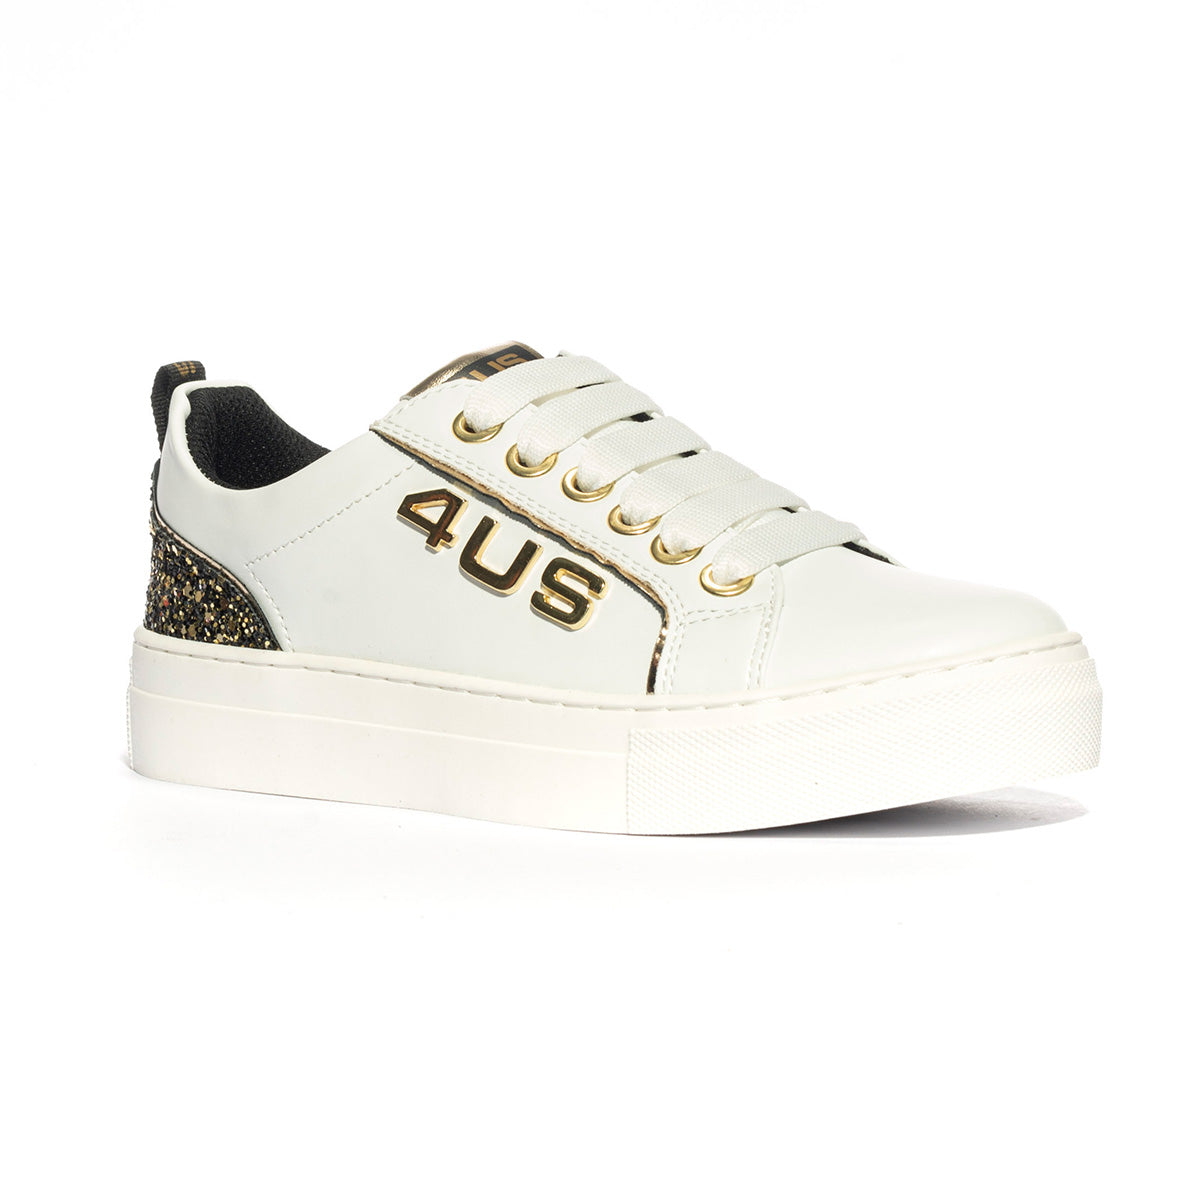 Sneakers 4US 42501 Bianche Oro